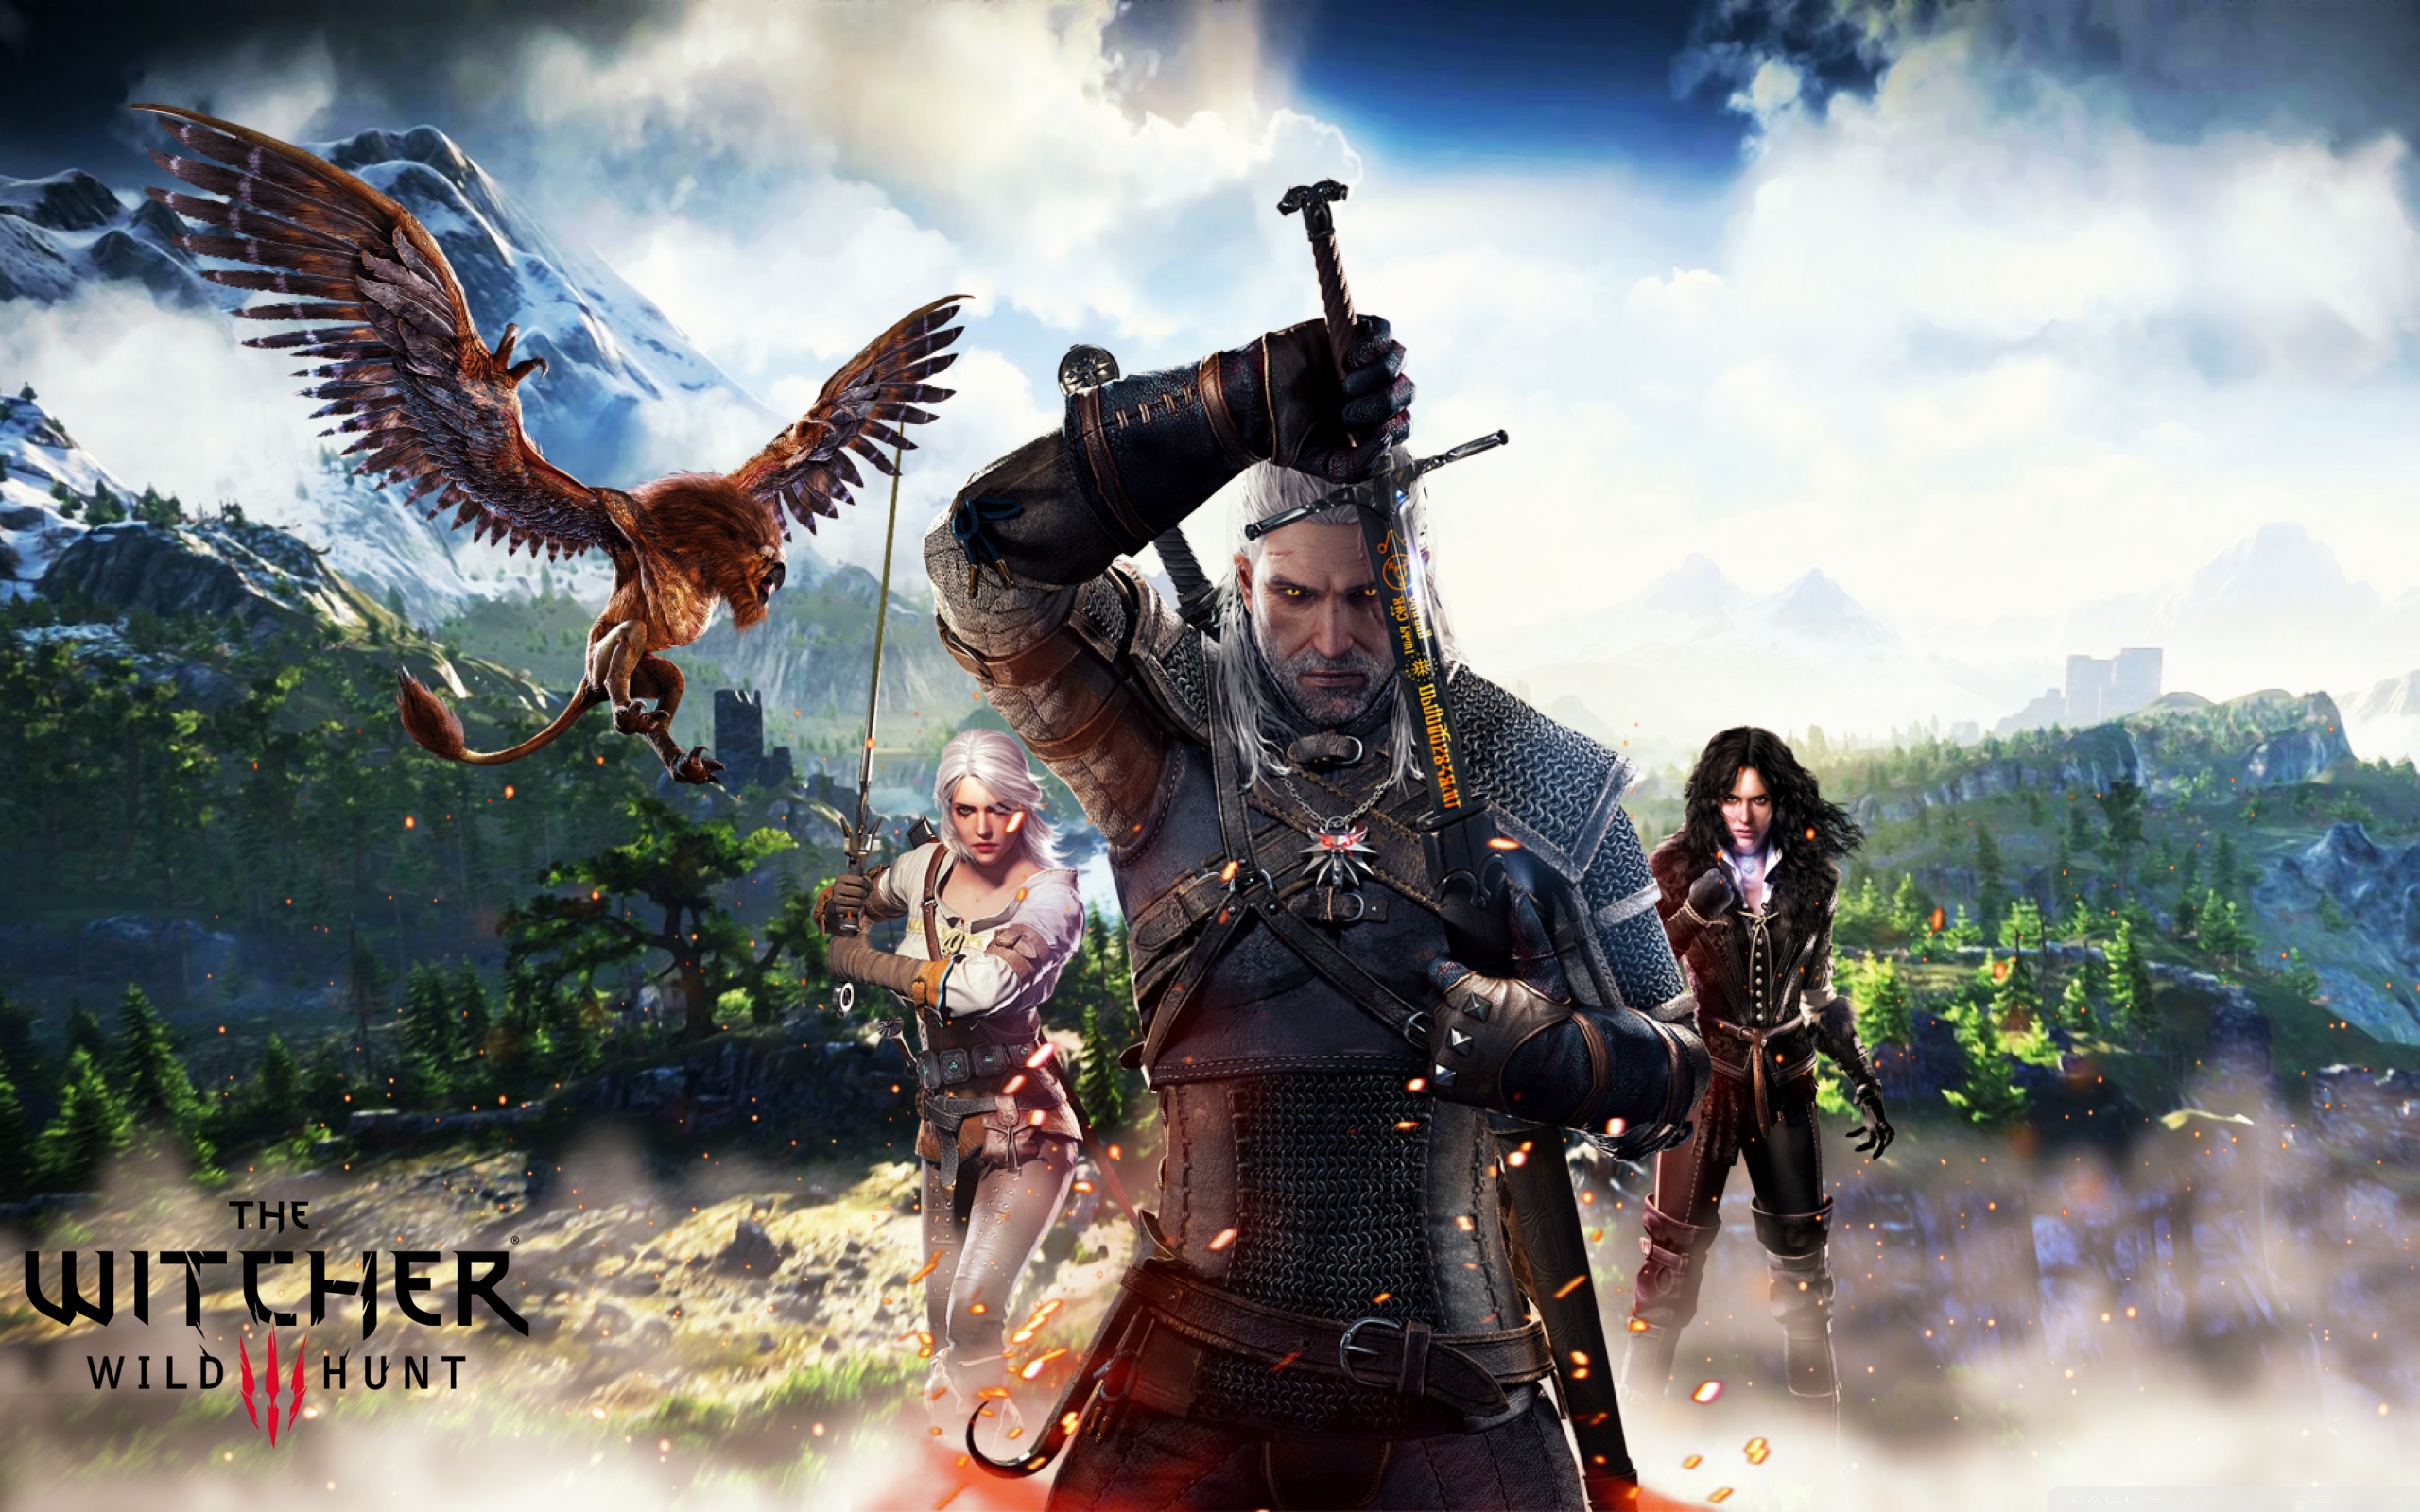 The Witcher Wild Hunt Ultra HD Desktop Background Wallpaper For